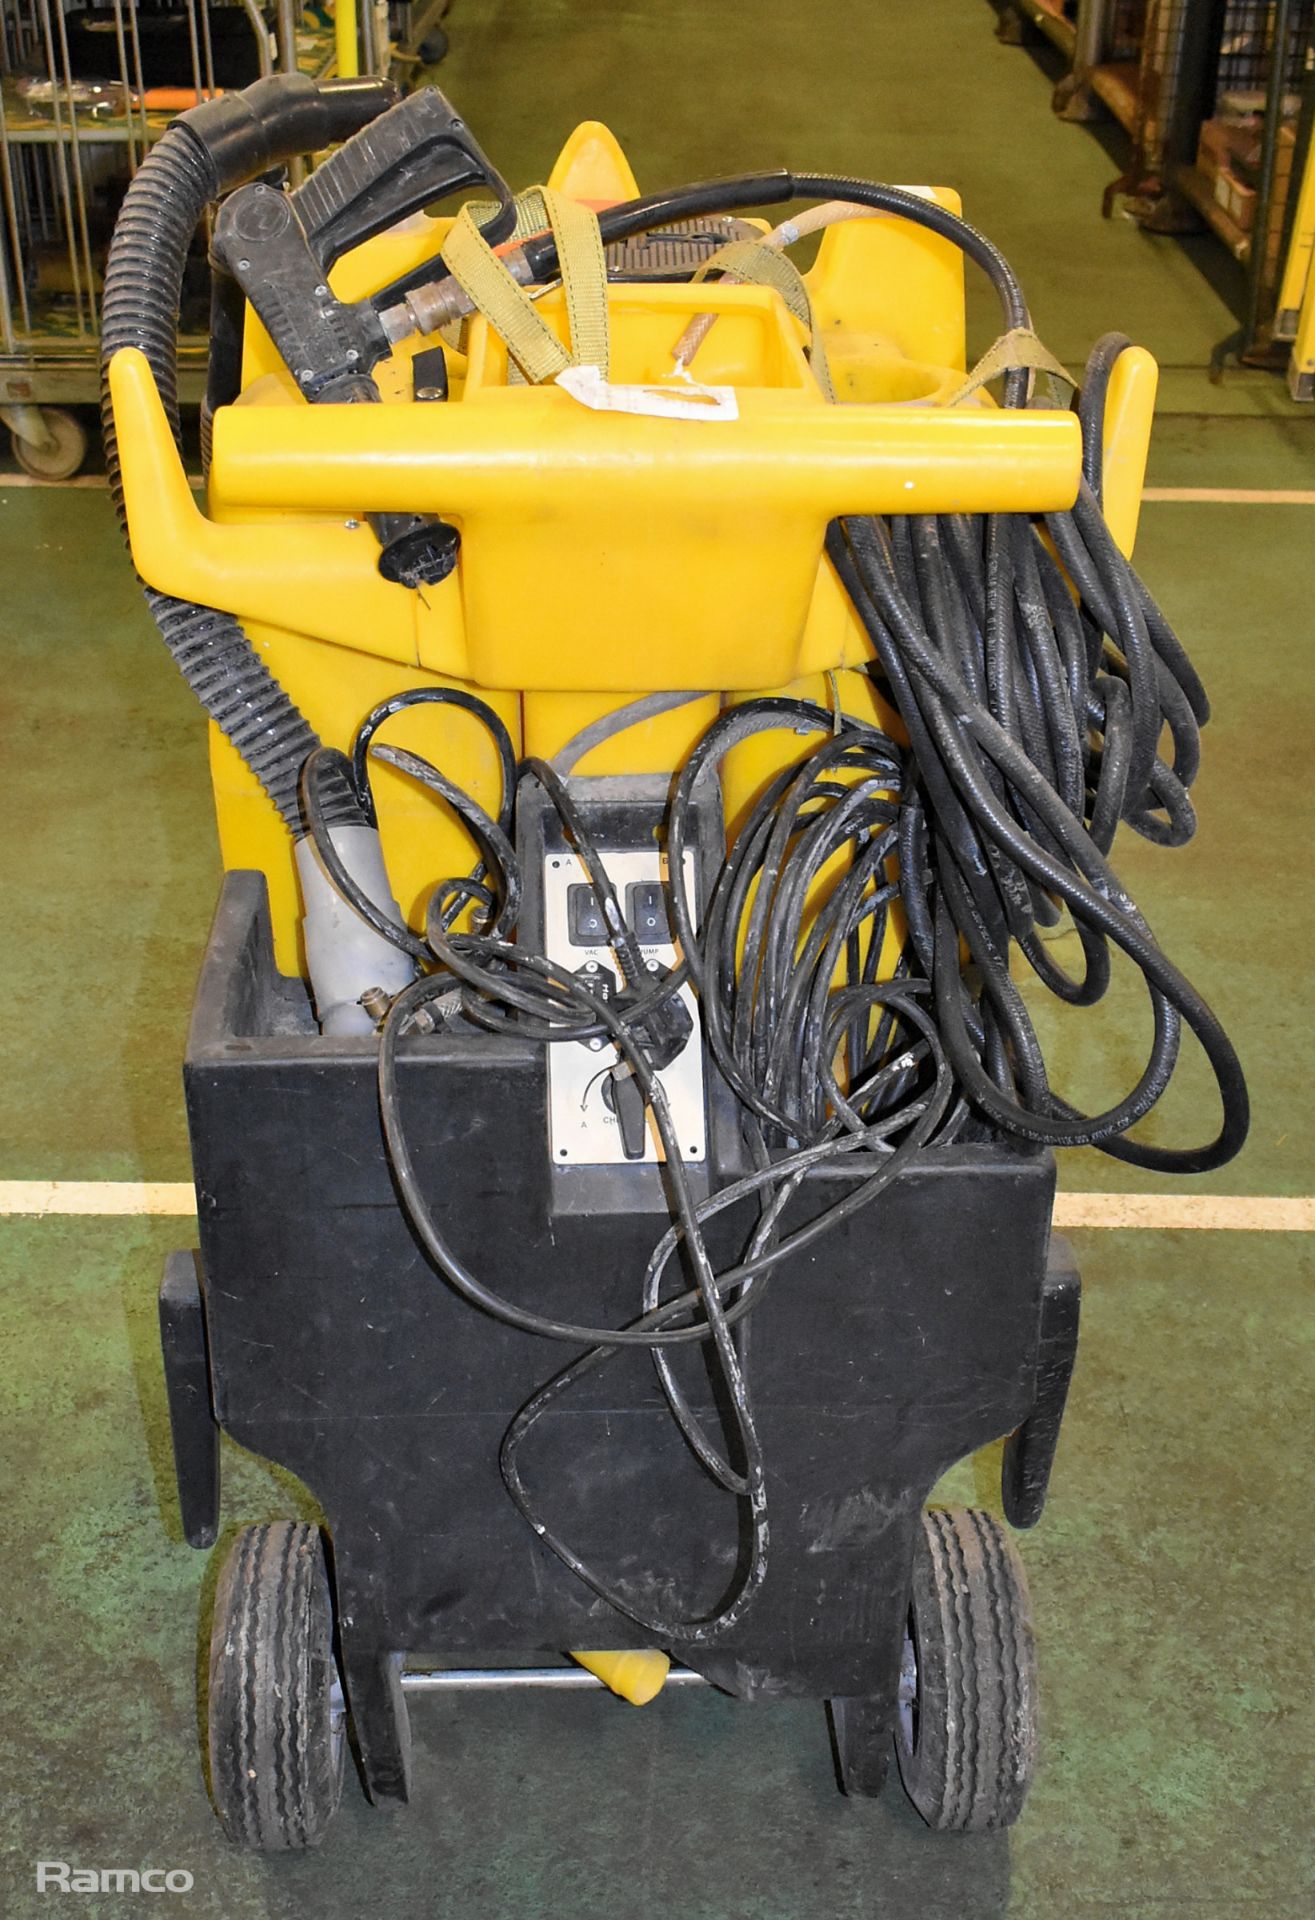 Kaivac Cleaning Systems industrial pressure washer - 240V - Image 4 of 7